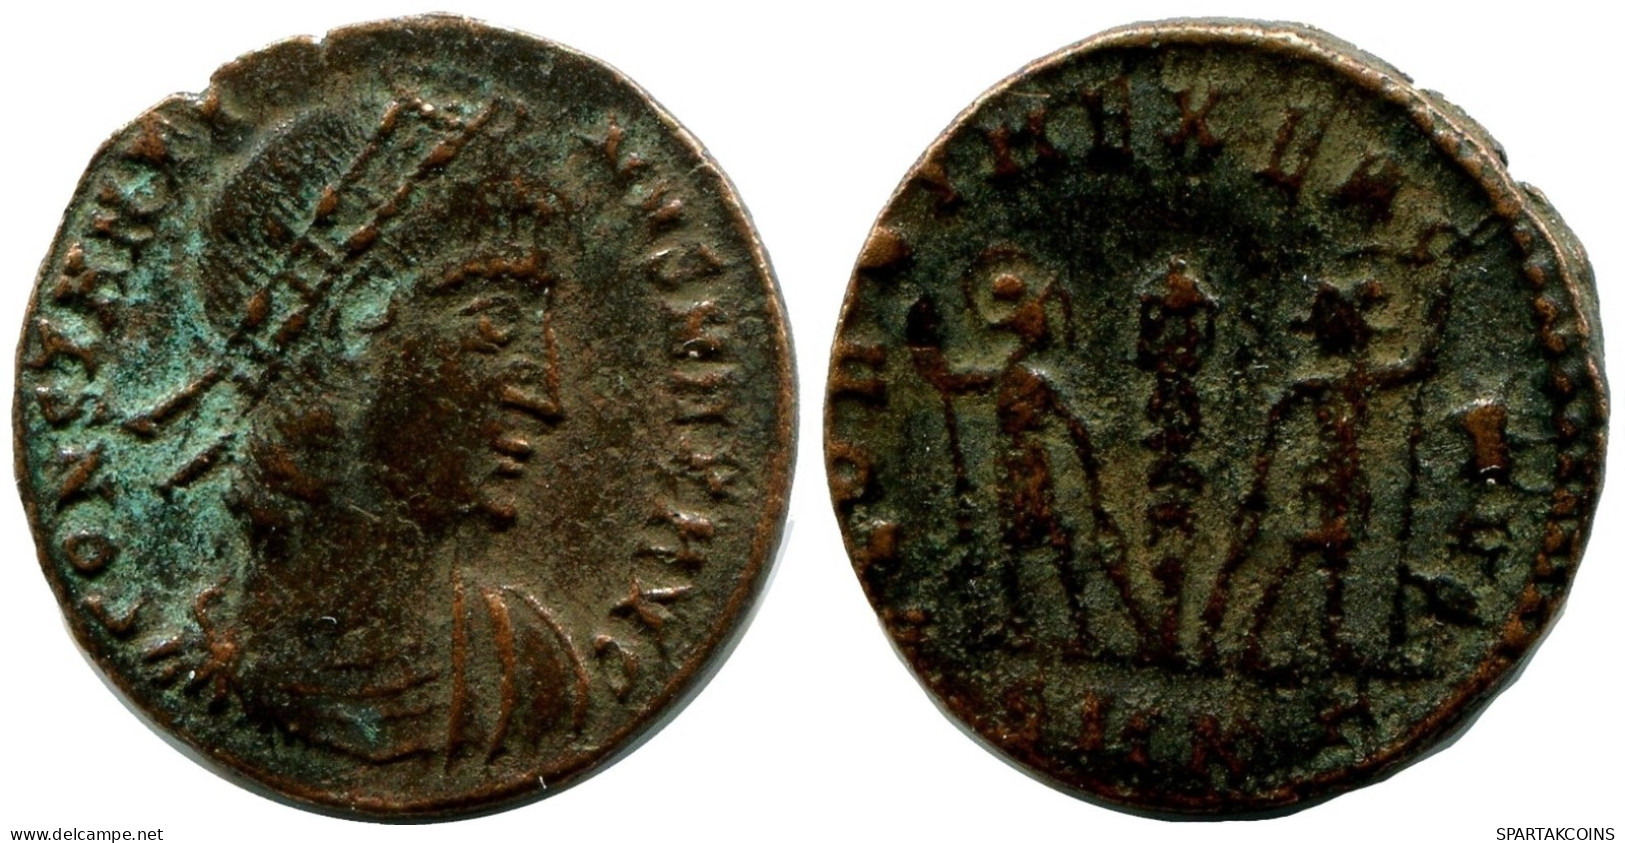 CONSTANTINE I MINTED IN CYZICUS FOUND IN IHNASYAH HOARD EGYPT #ANC11026.14.F.A - The Christian Empire (307 AD To 363 AD)